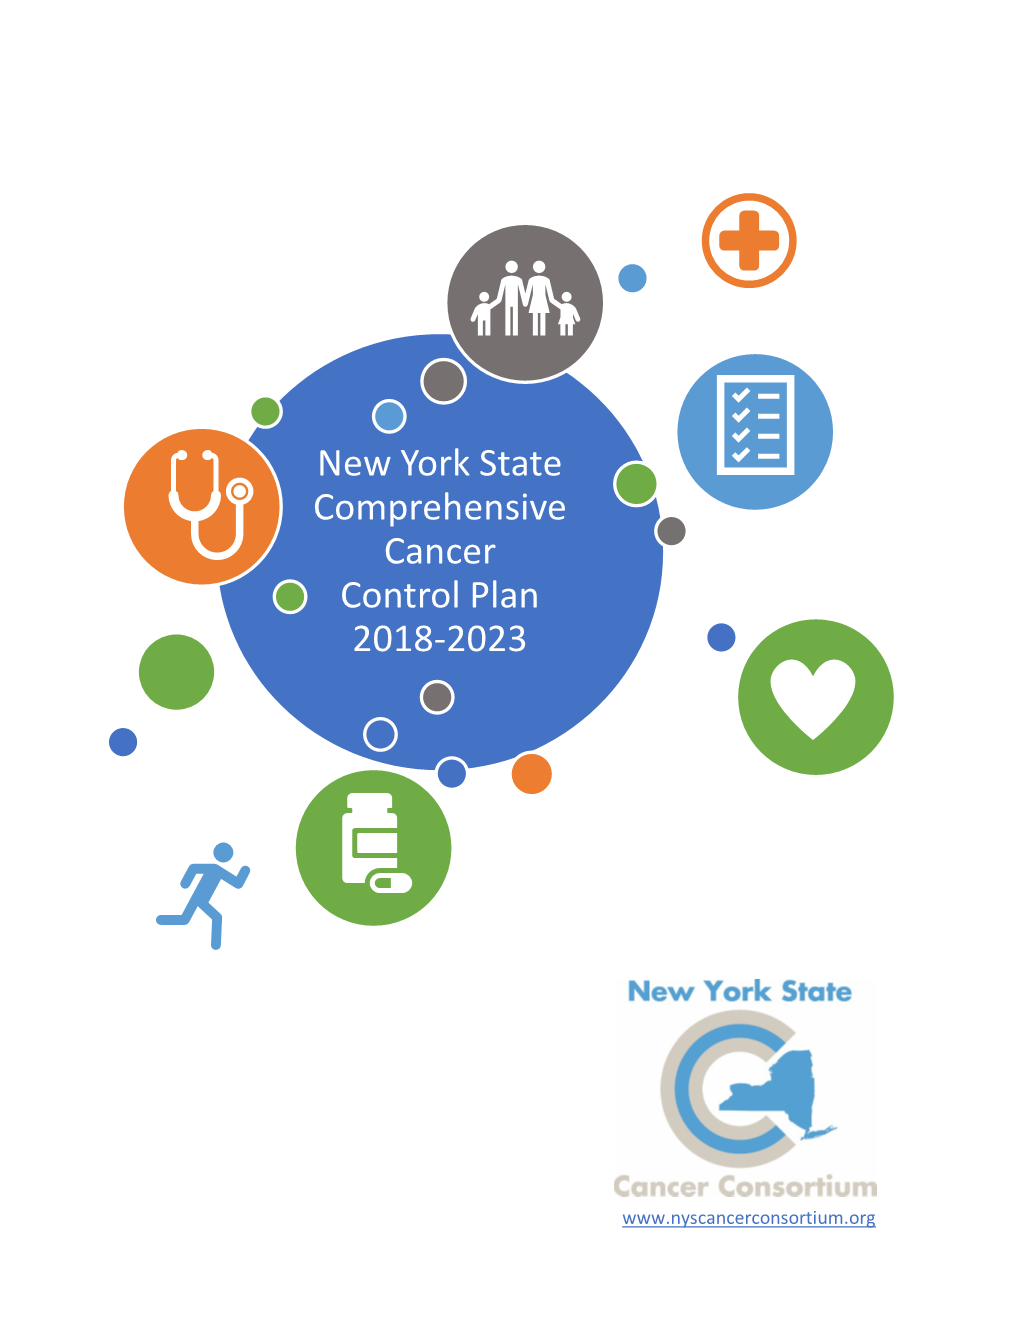 New York State Comprehensive Cancer Control Plan, 2018-2023